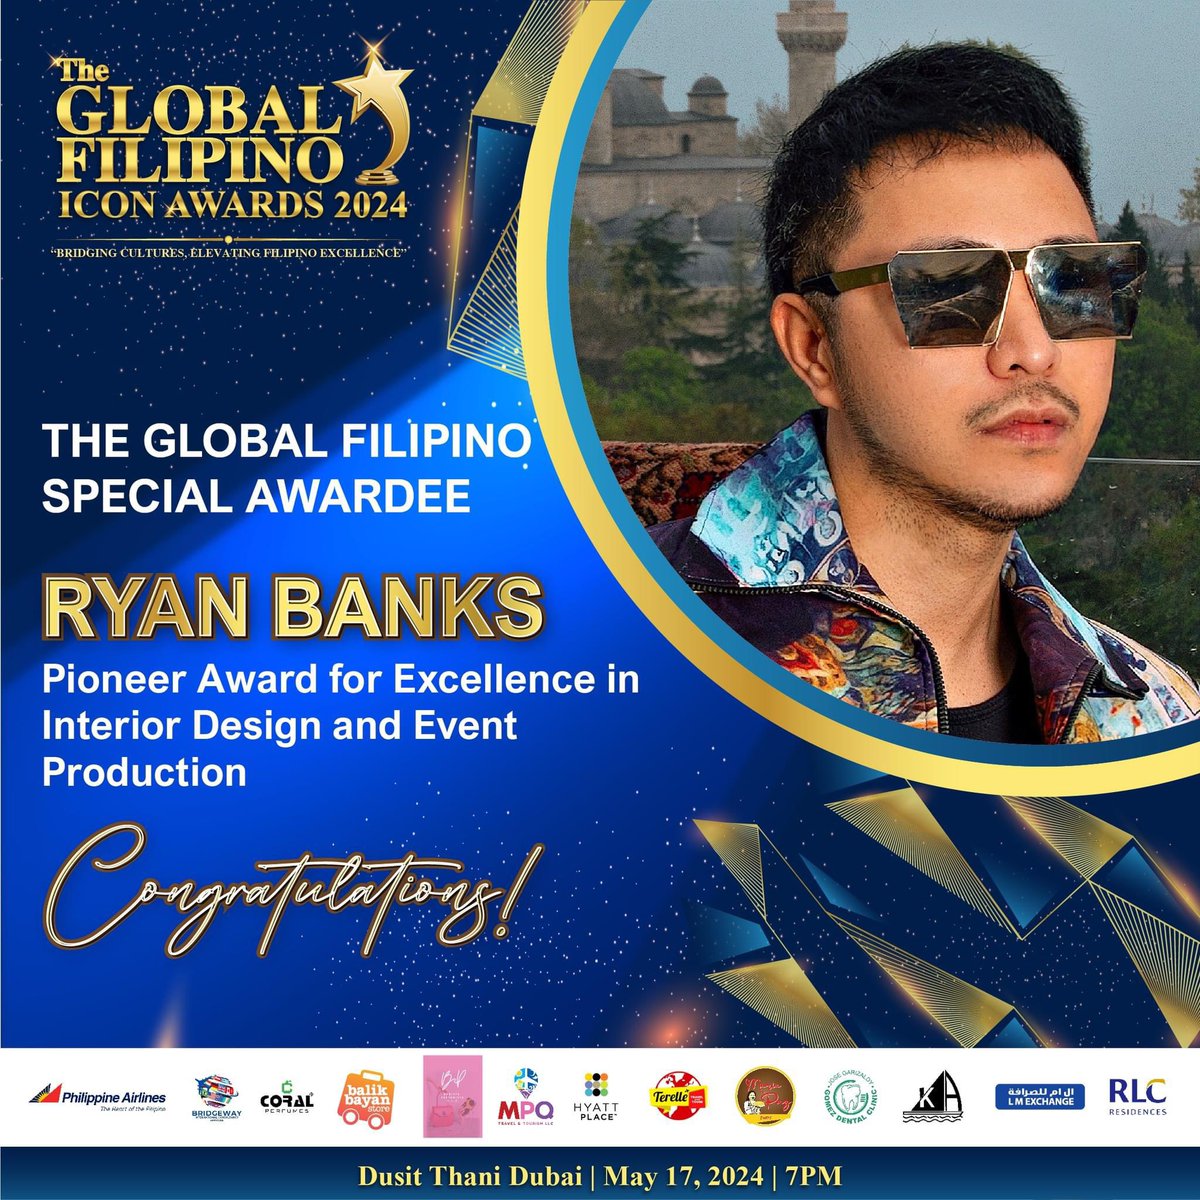 Feeling incredibly humbled to receive this Award for Excellence in Interior Design and Event Production at the 4th Global Filipino Icon Awards. This is to celebrate the beauty of creativity and collaboration. Thank you for this recognition The Global Filipino Magazine.